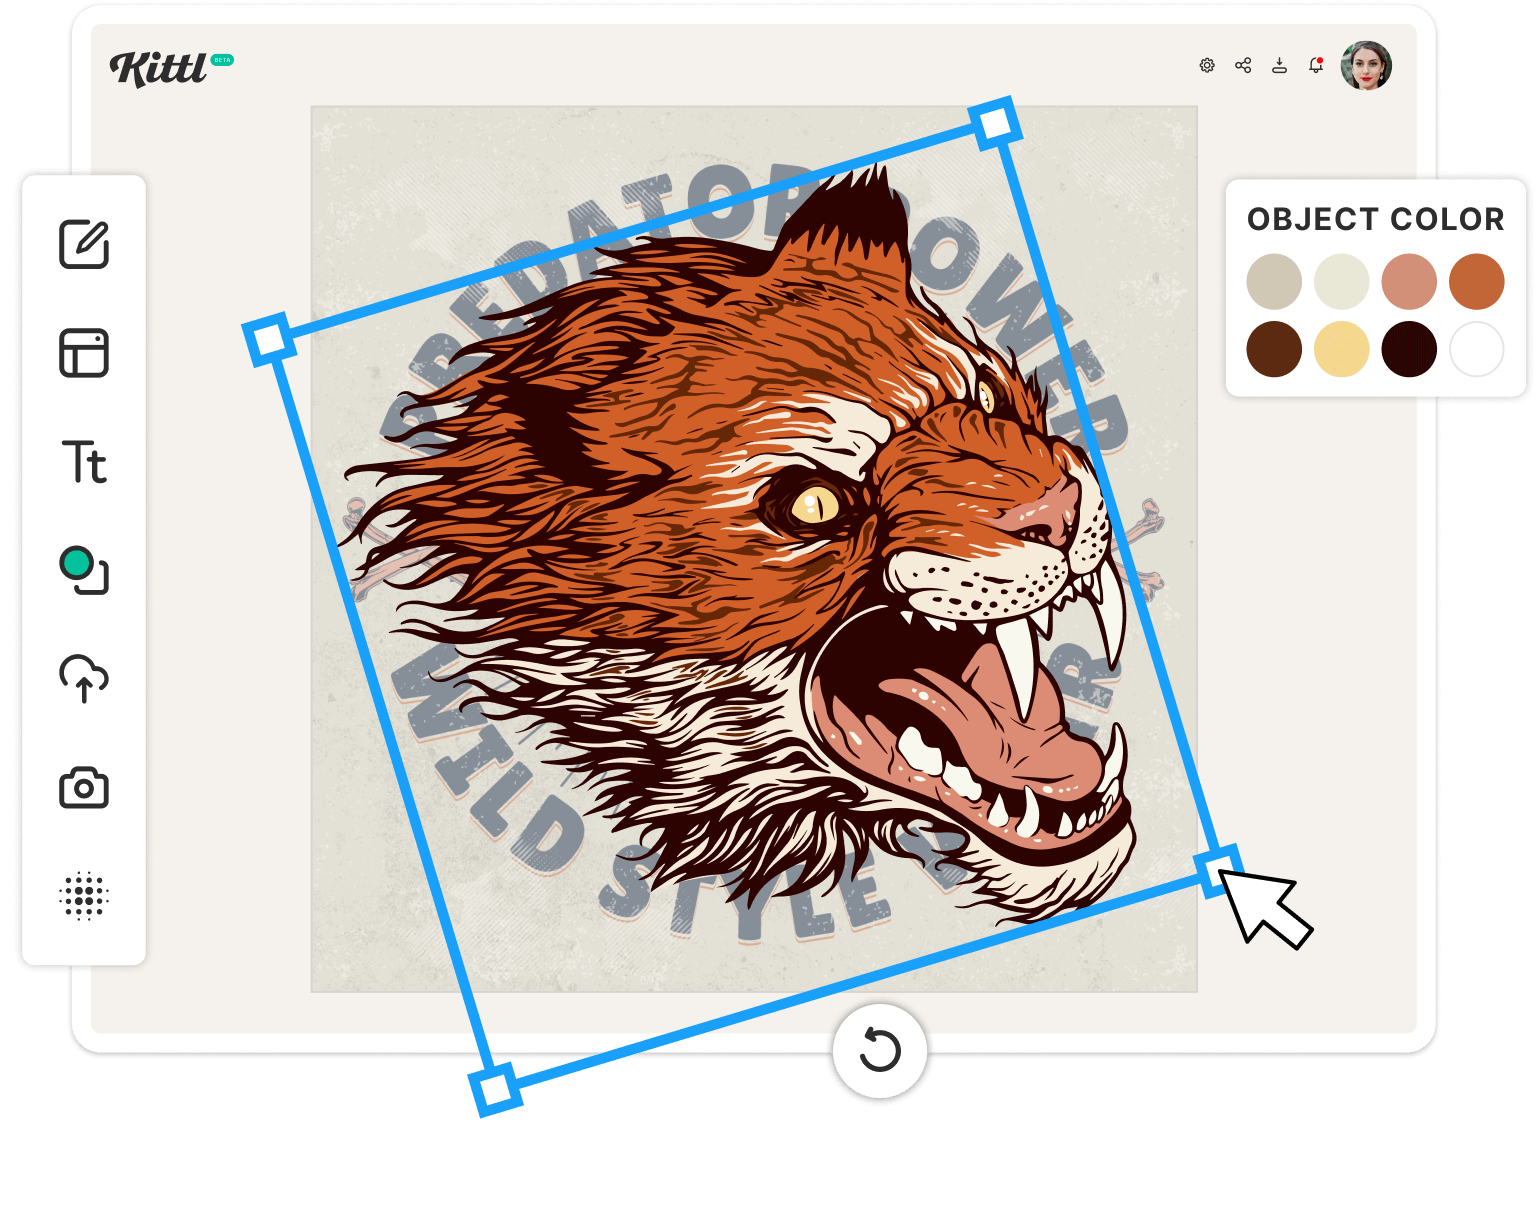 Angry tiger illustration being rotated and colors being changed in Kittl.